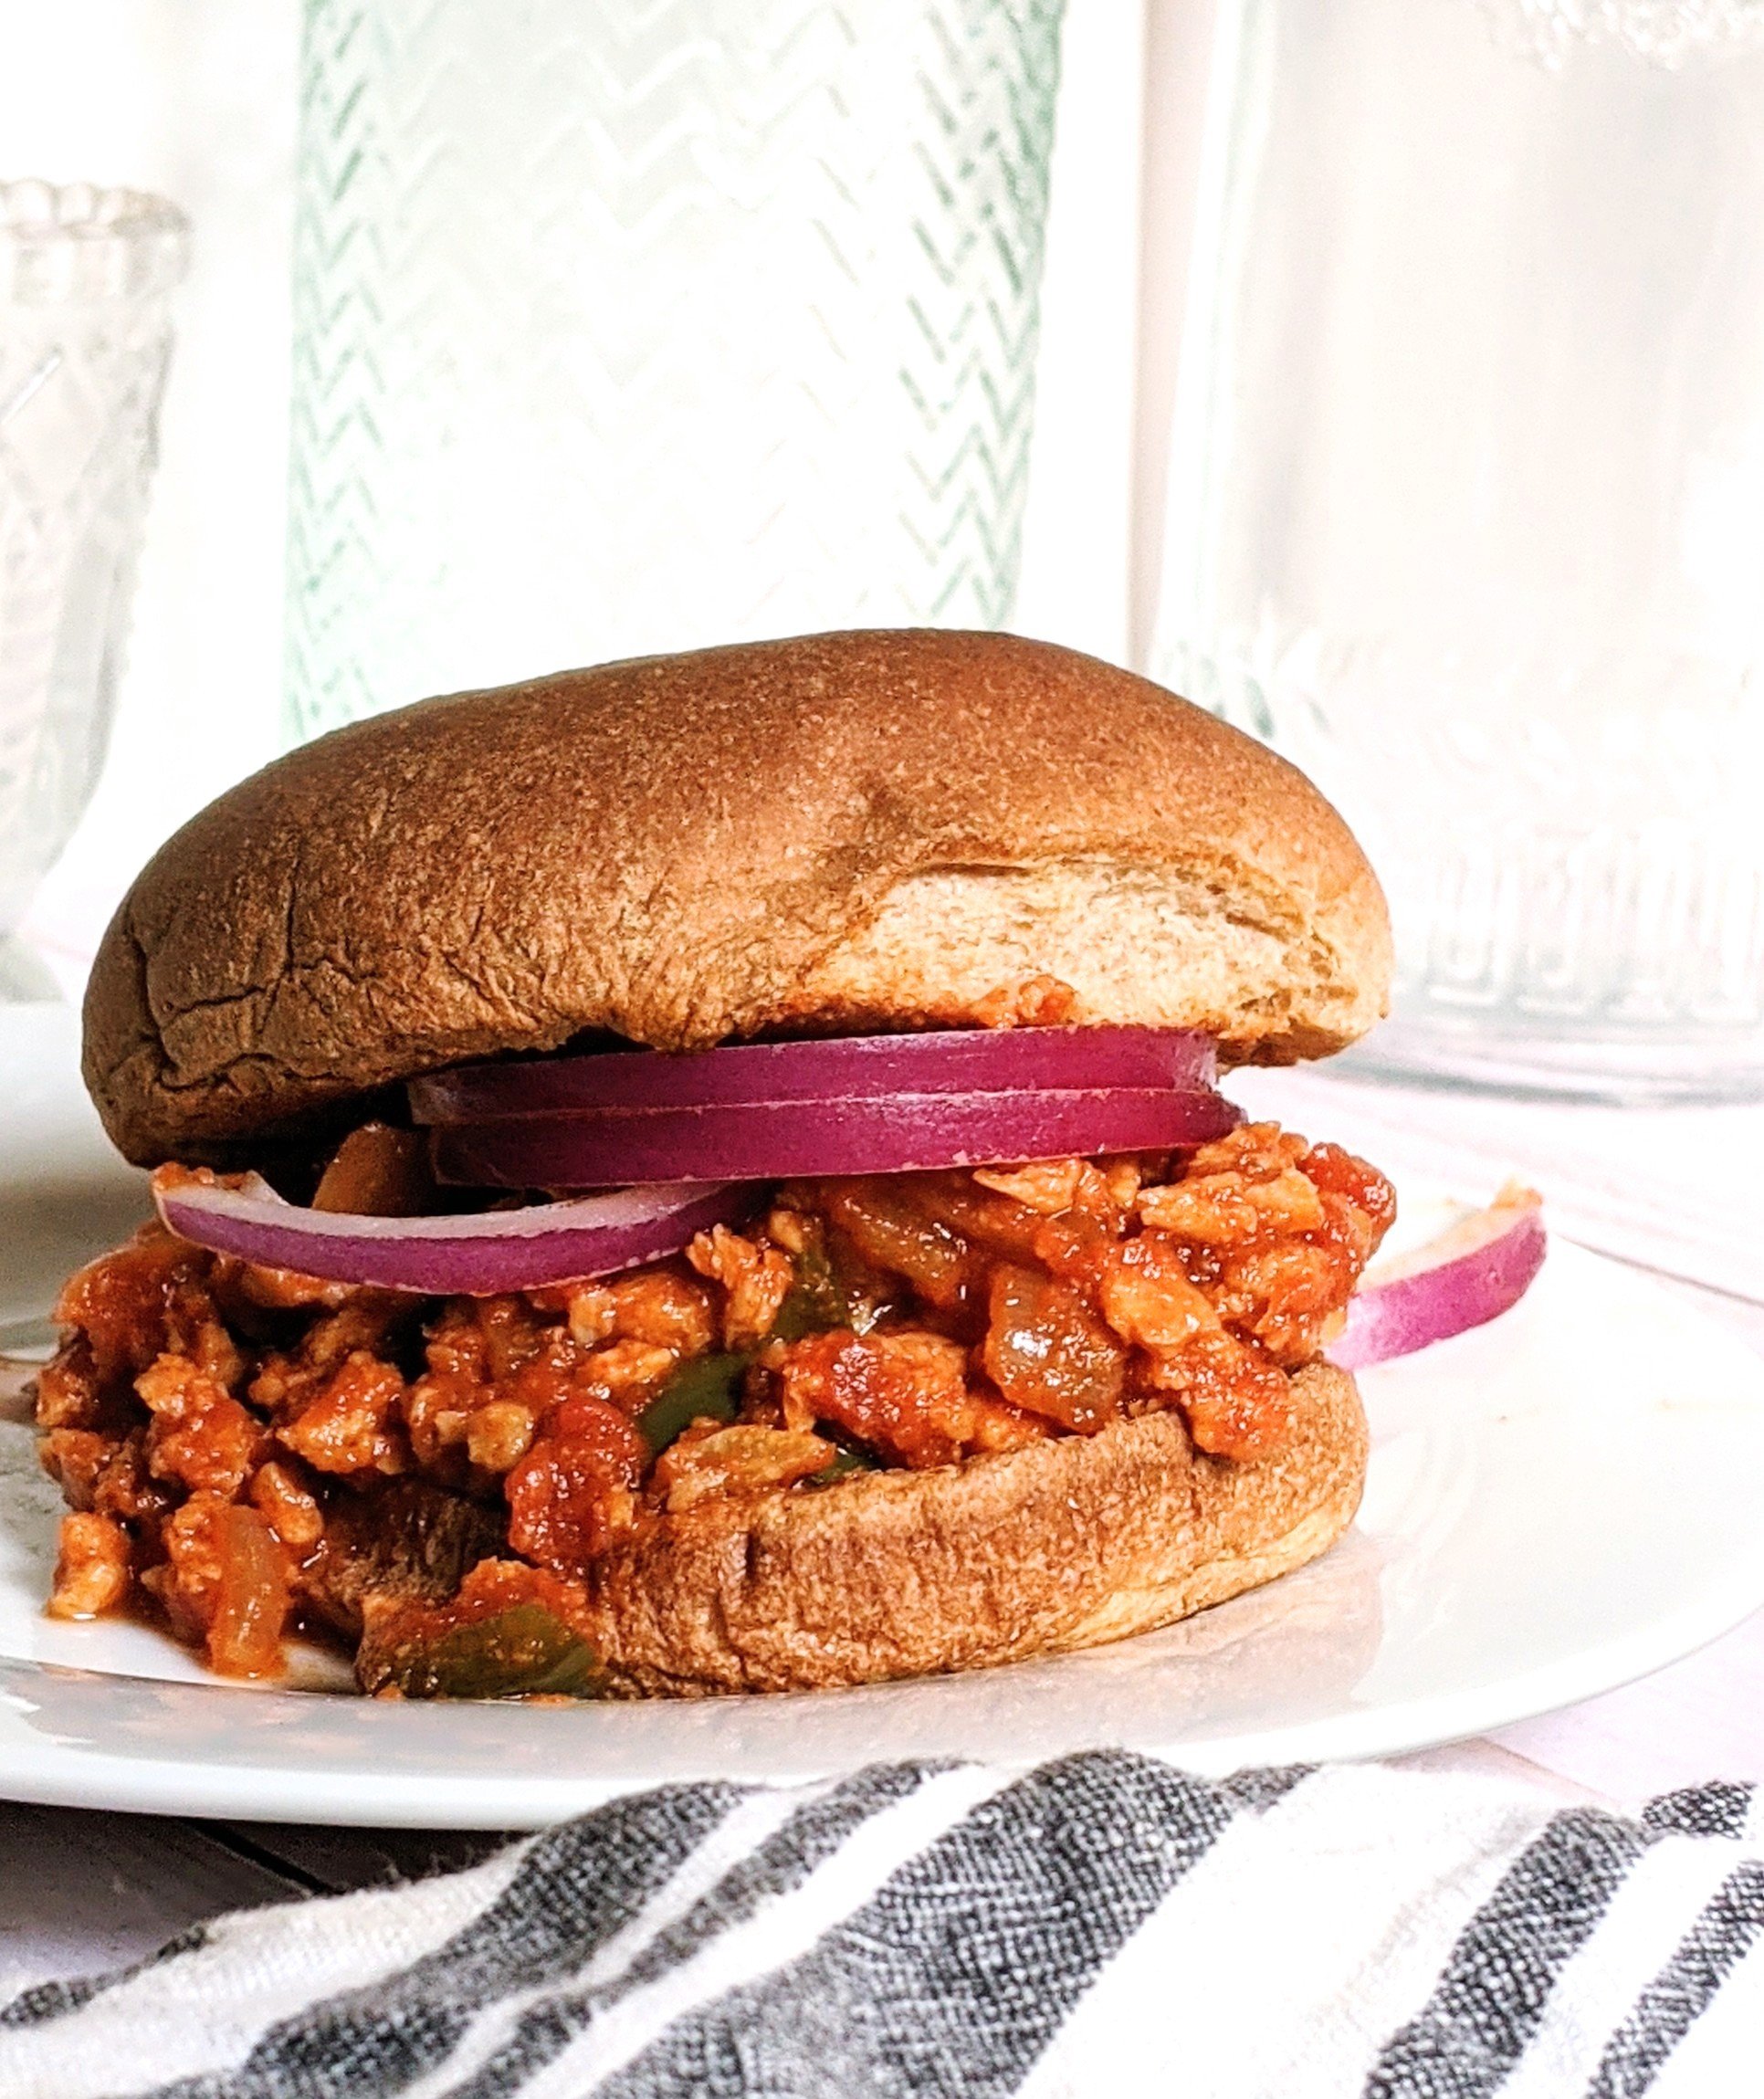 tvp sloppy joes recipe meatless ssloppy joes with textured vegetable protein filling plant based sloppy joes recipe